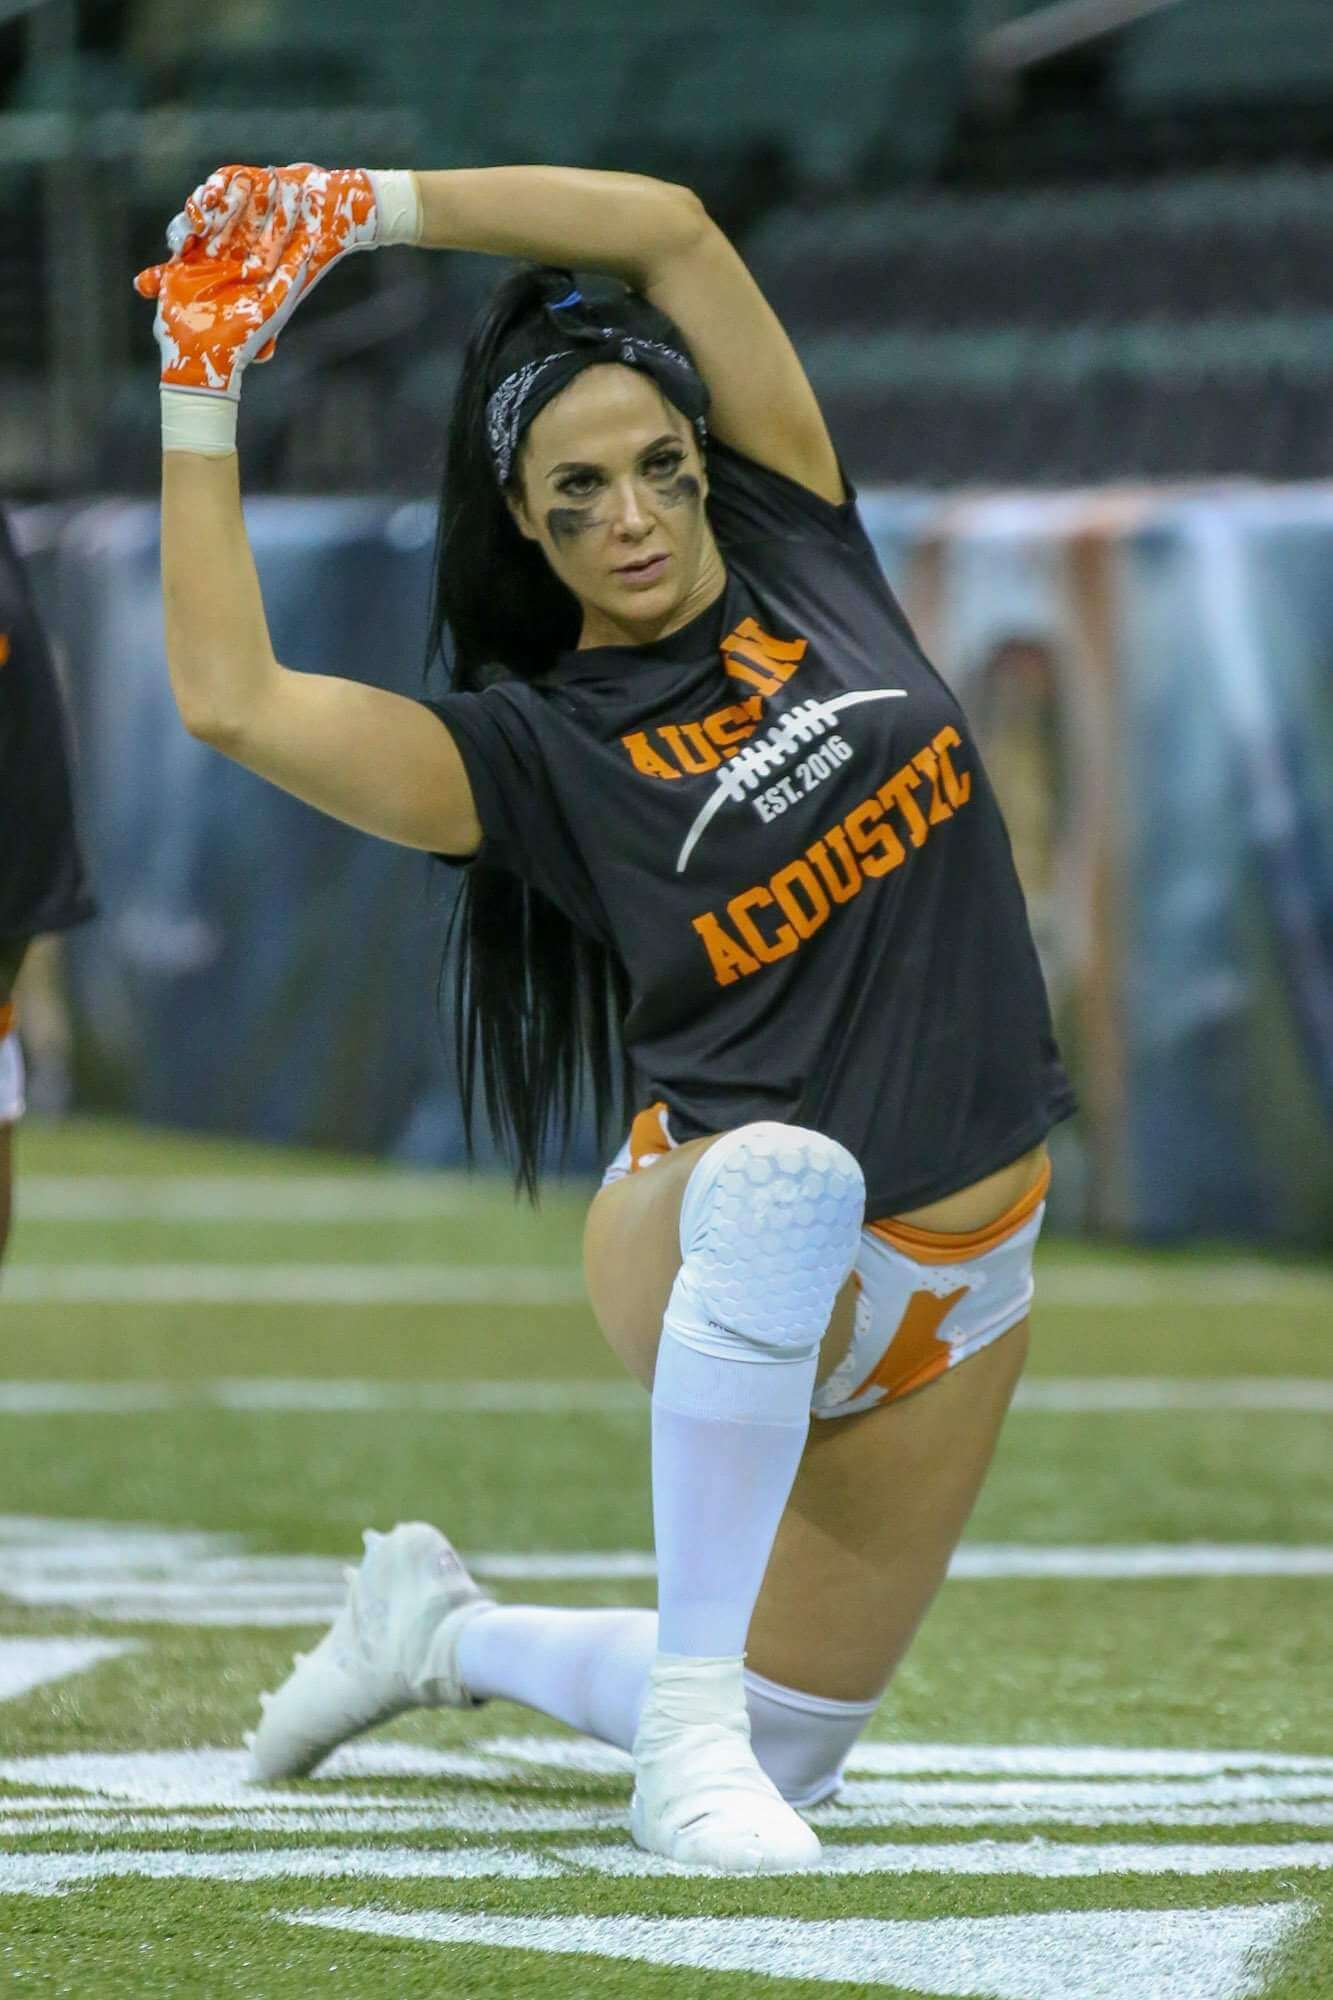 The Legends Football League Beautiful Women And Football, Need We Say Anymore! 3